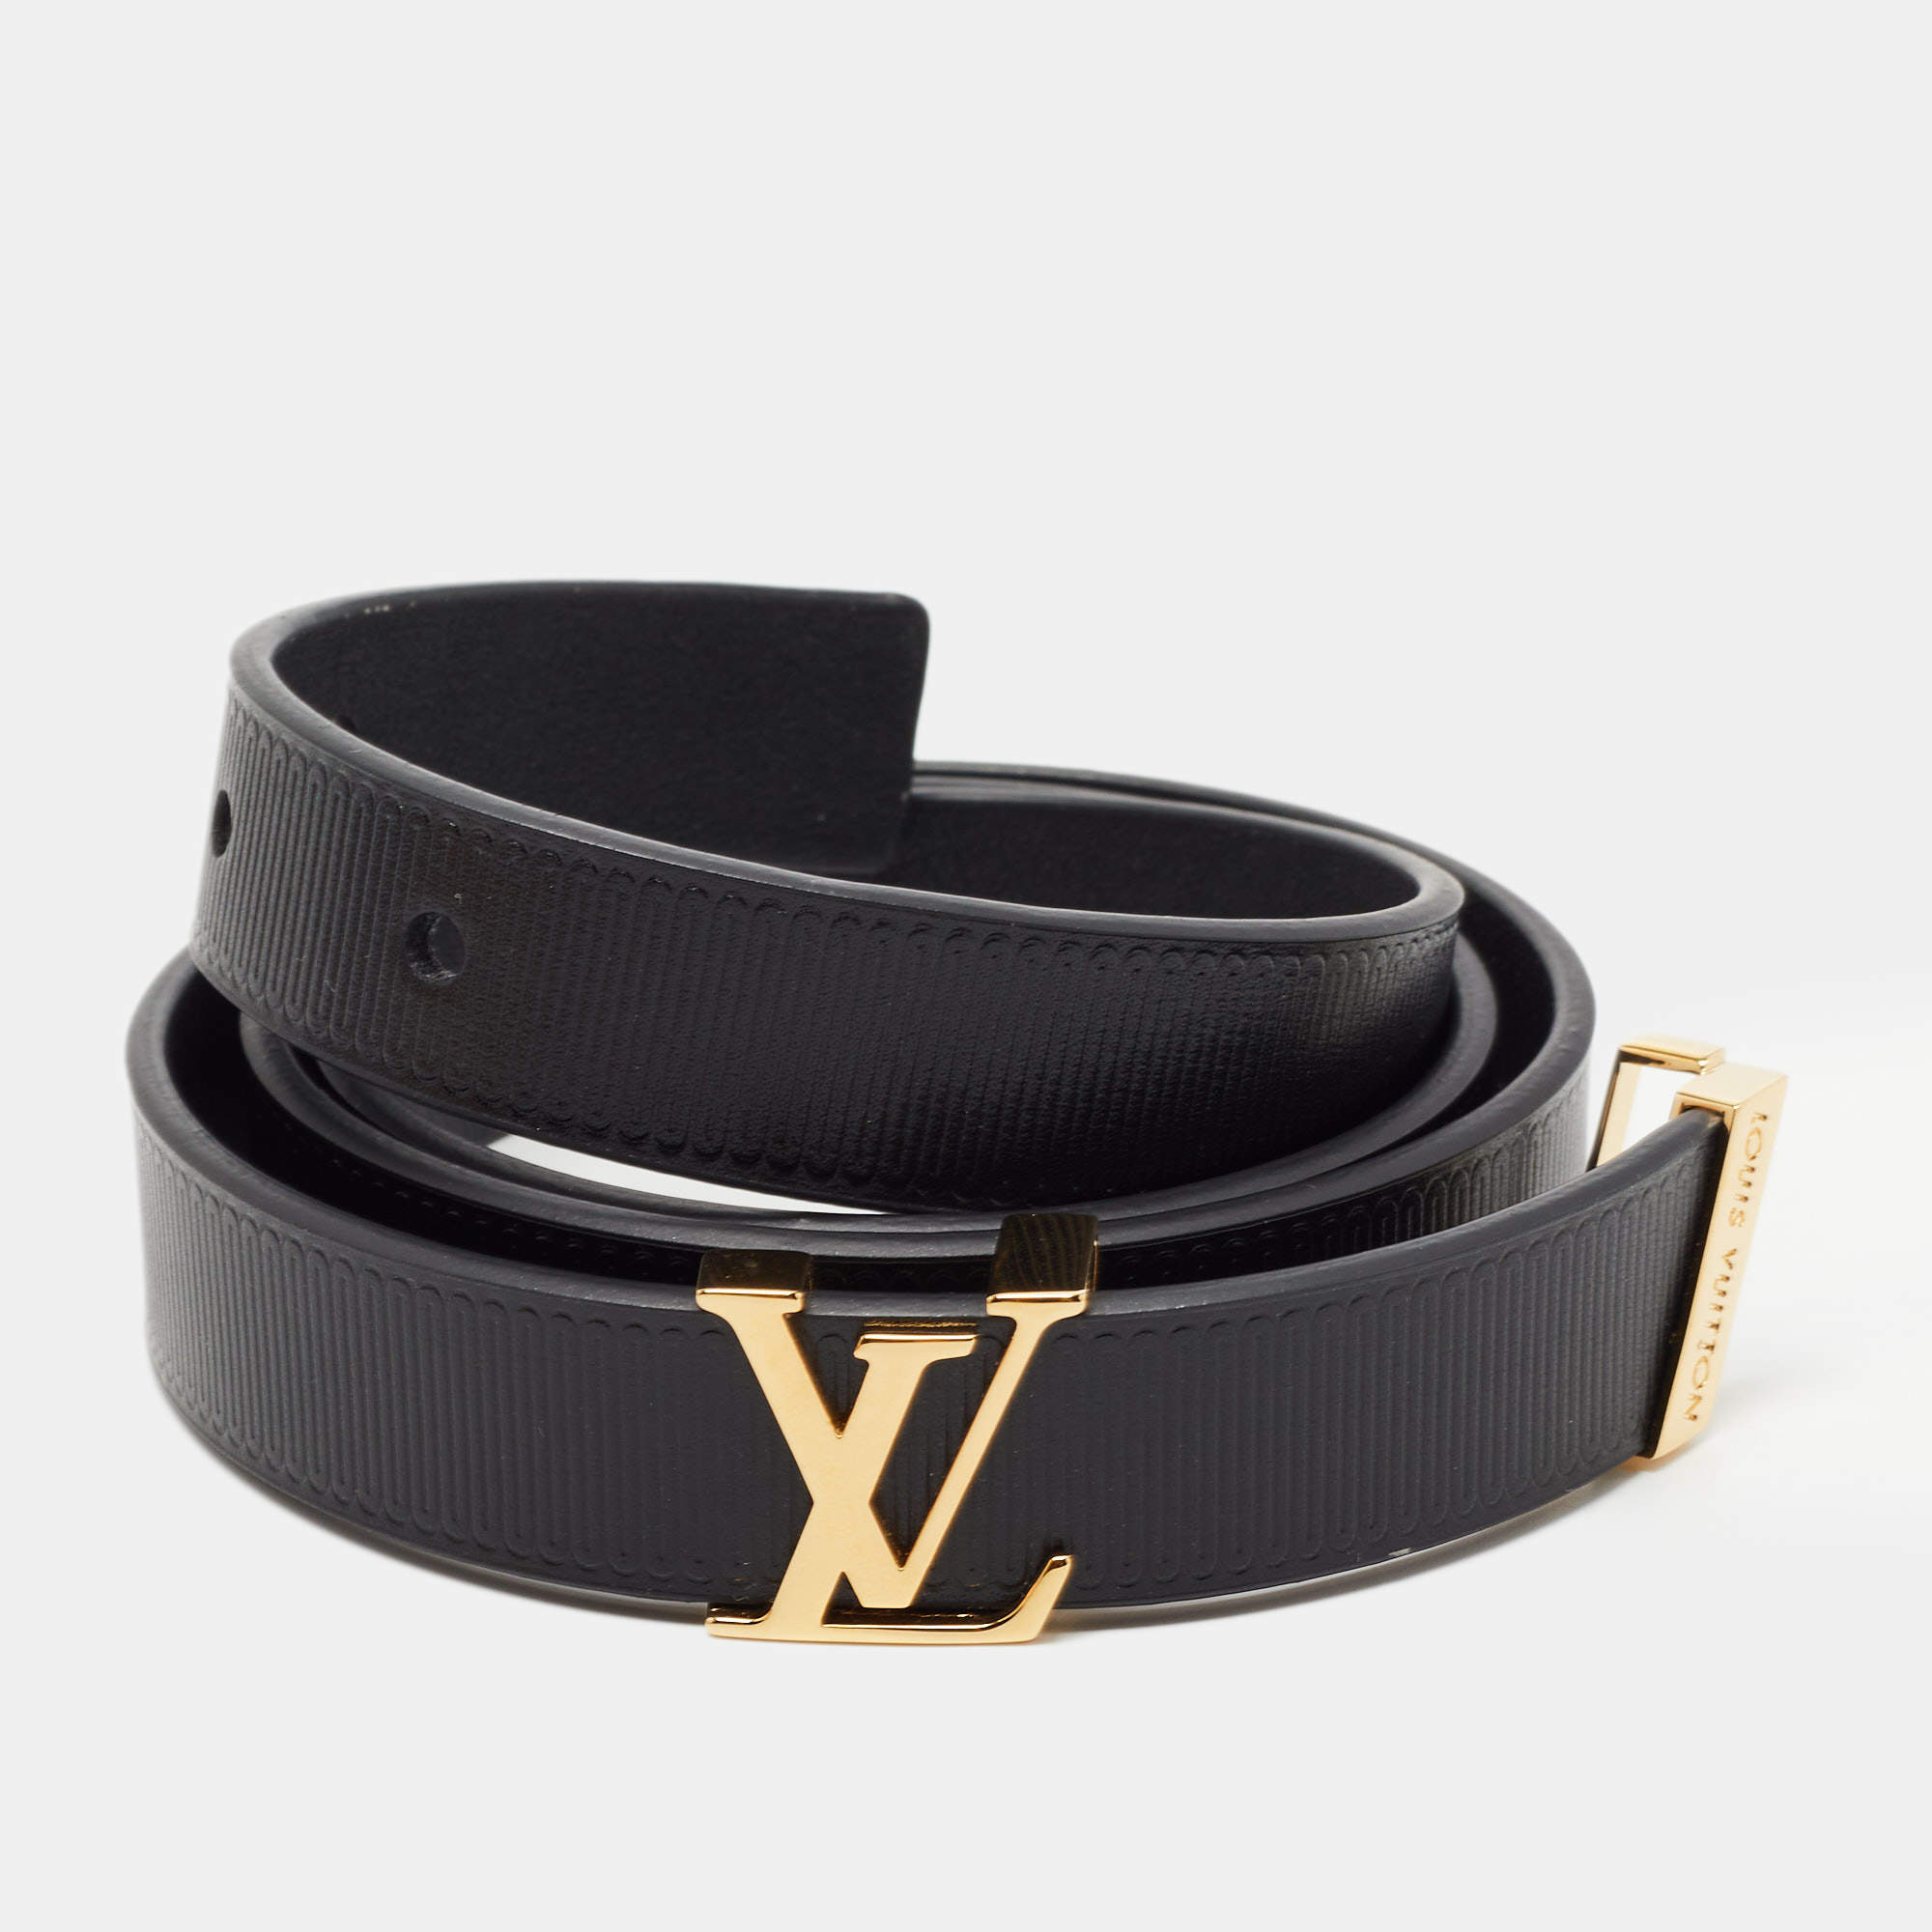 New W/Box Limited Edition Louis Vuitton LV Black Leather belt